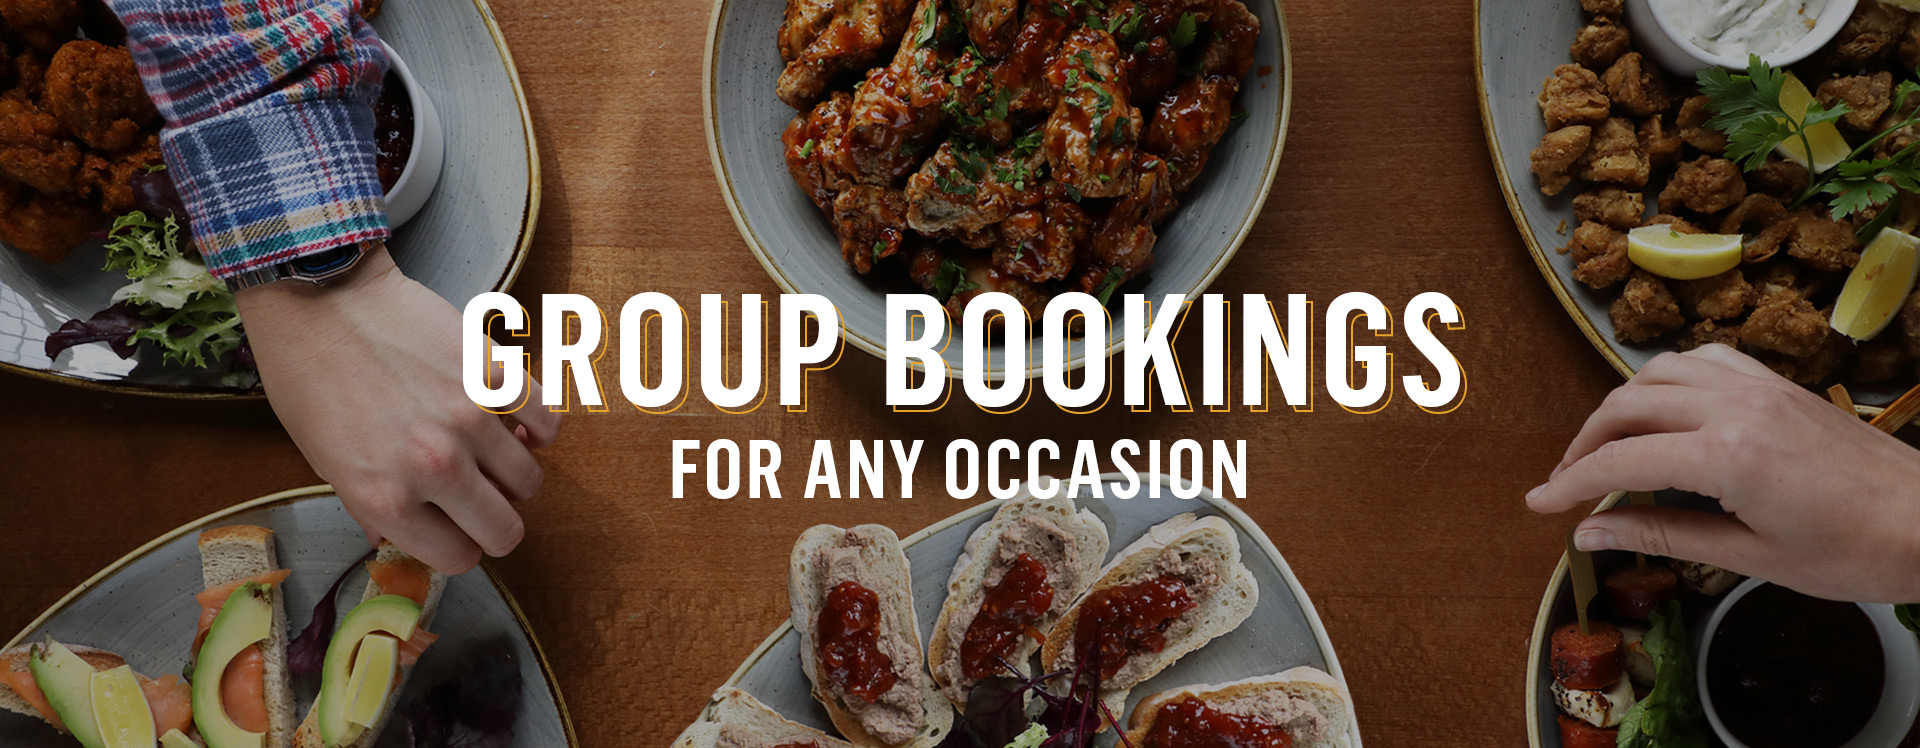 Group Bookings at The Cambridge